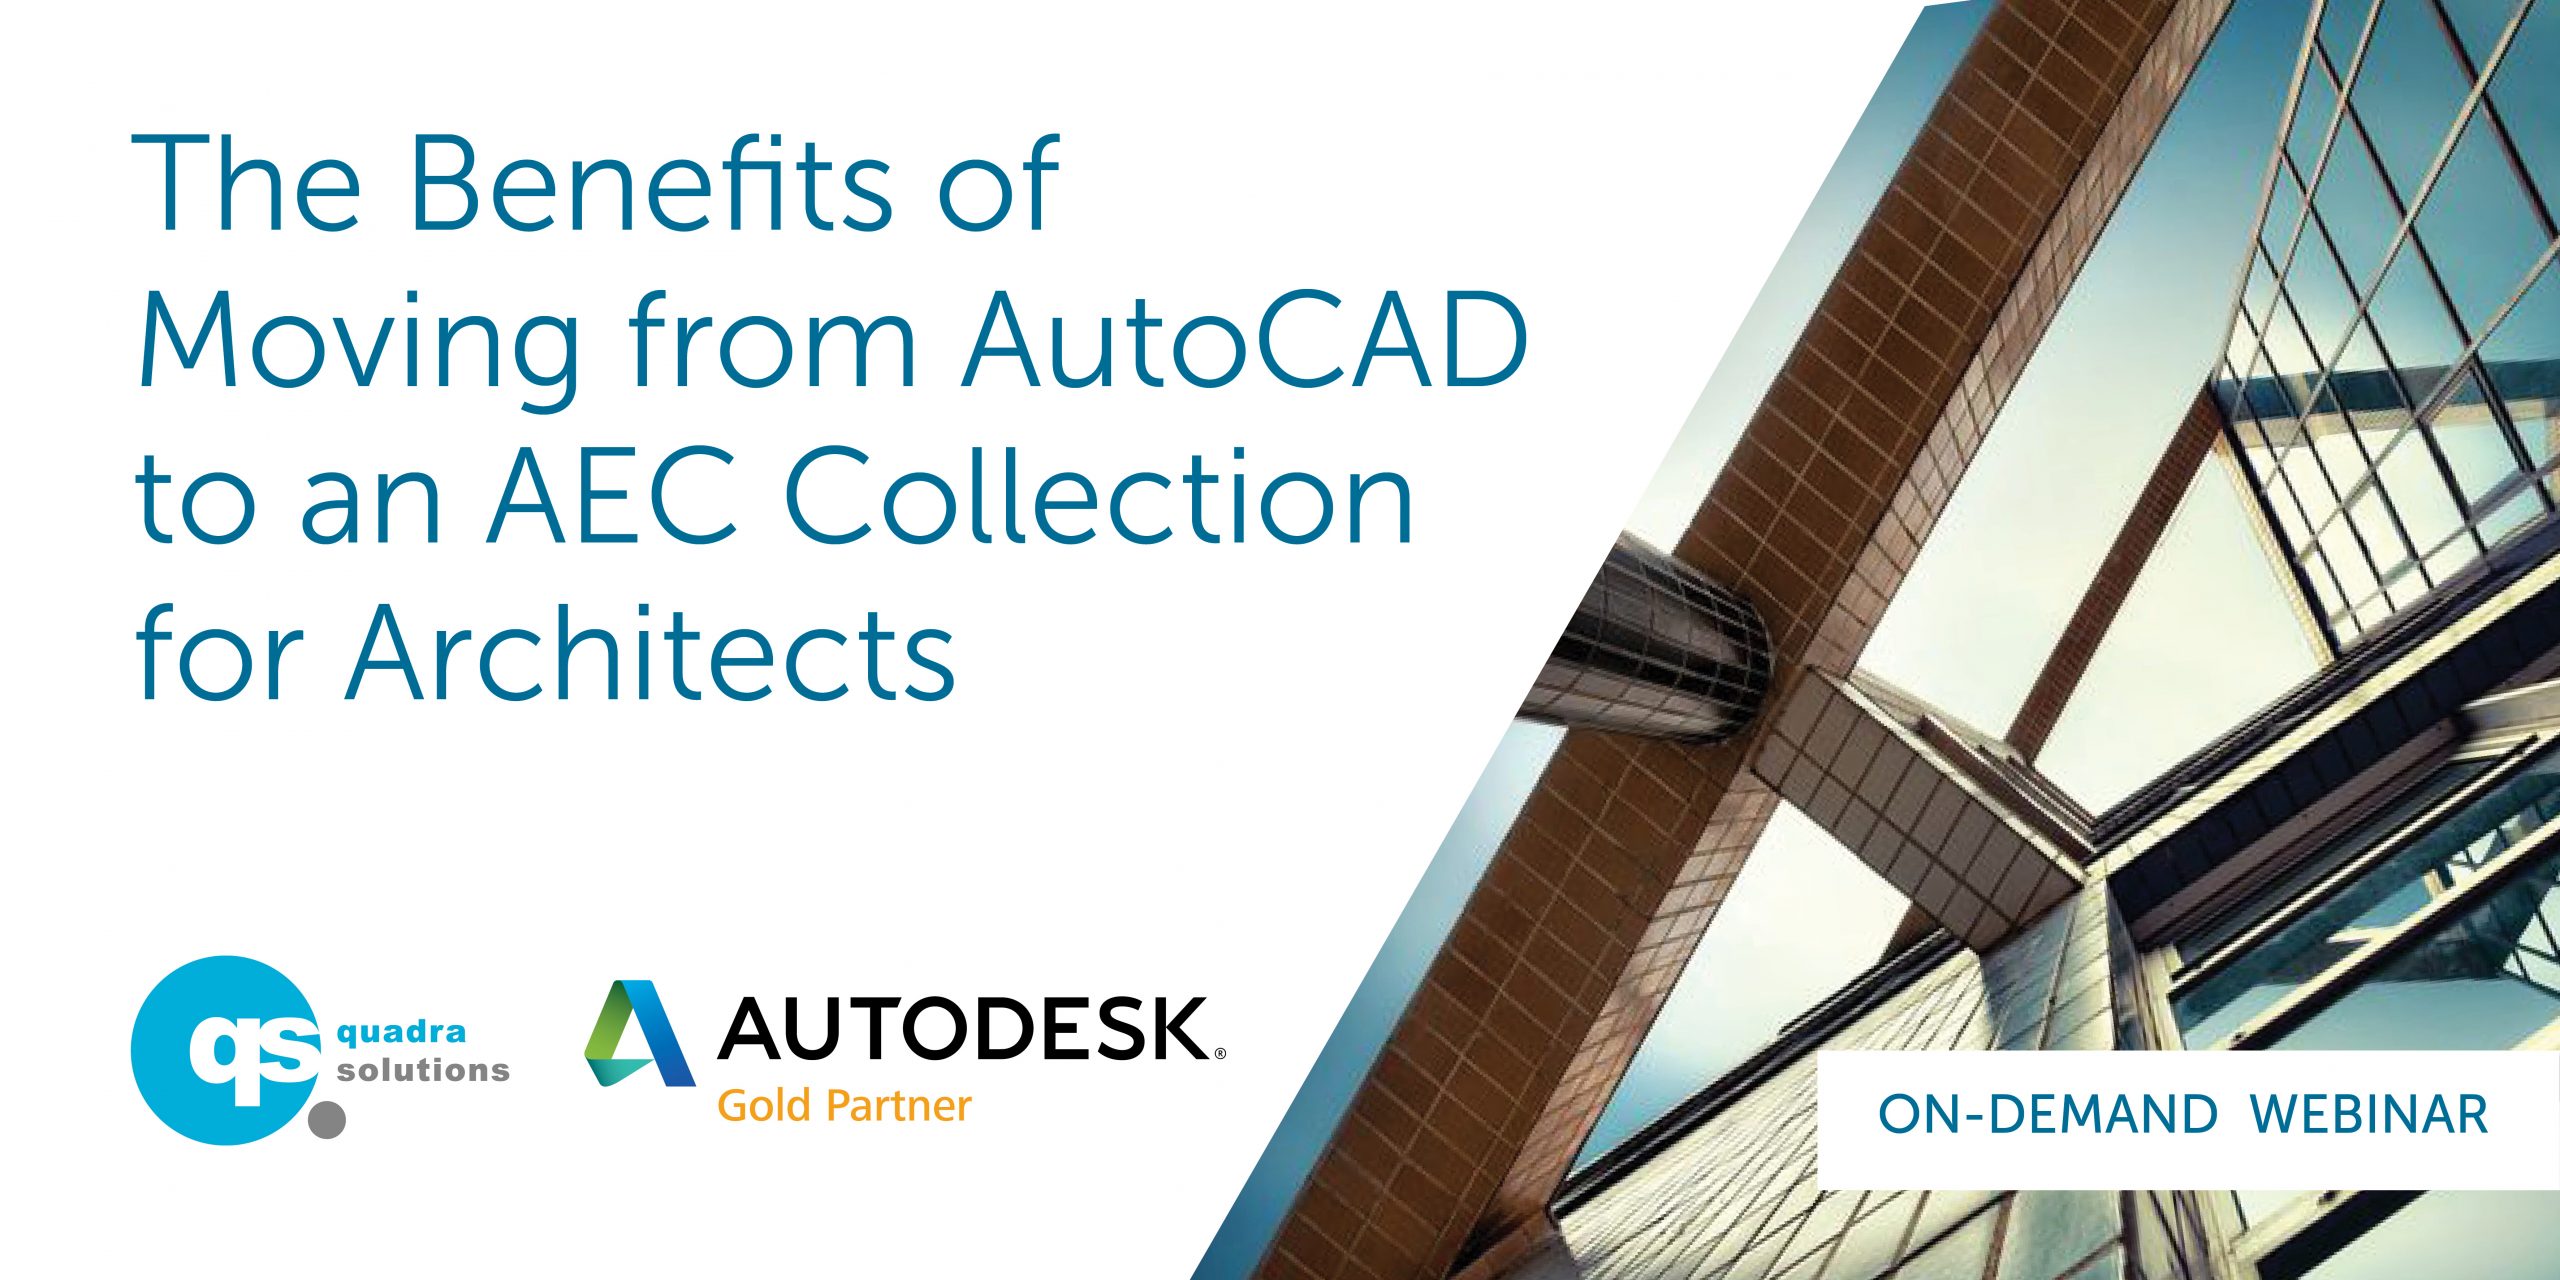 The benefits of moving from AutoCAD to an AEC Collection for Architects